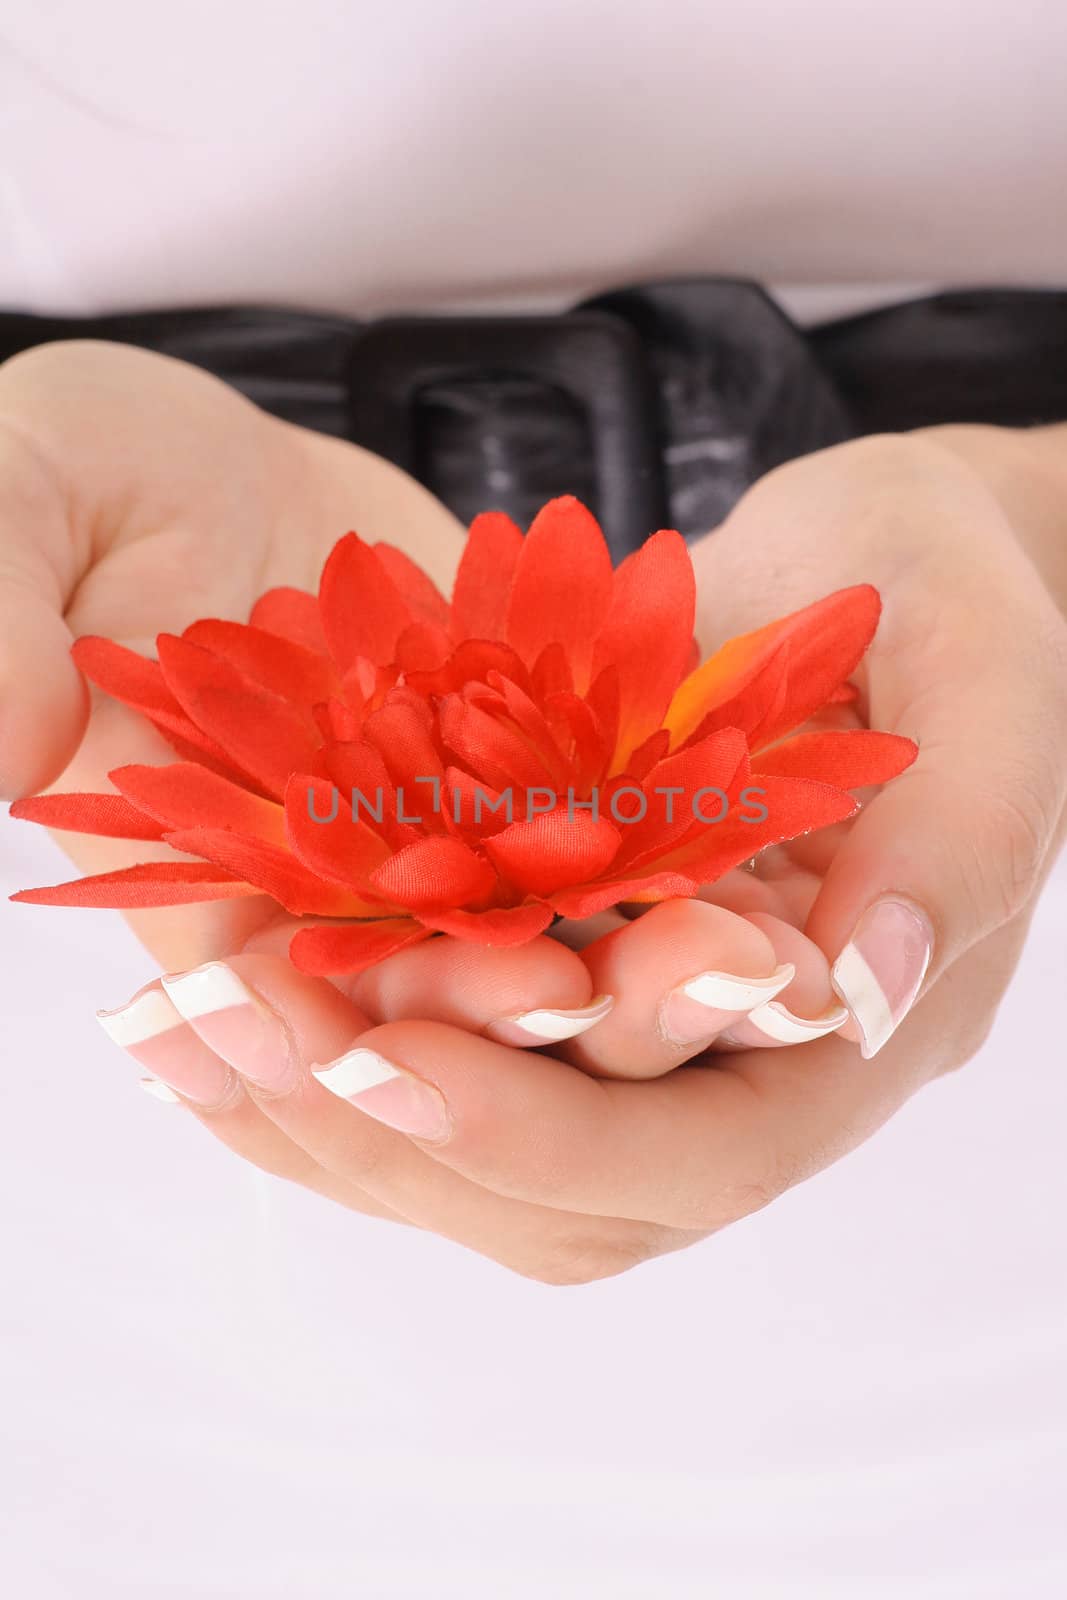 shot of beautifully manicured hands holding a flowers vertical by creativestock